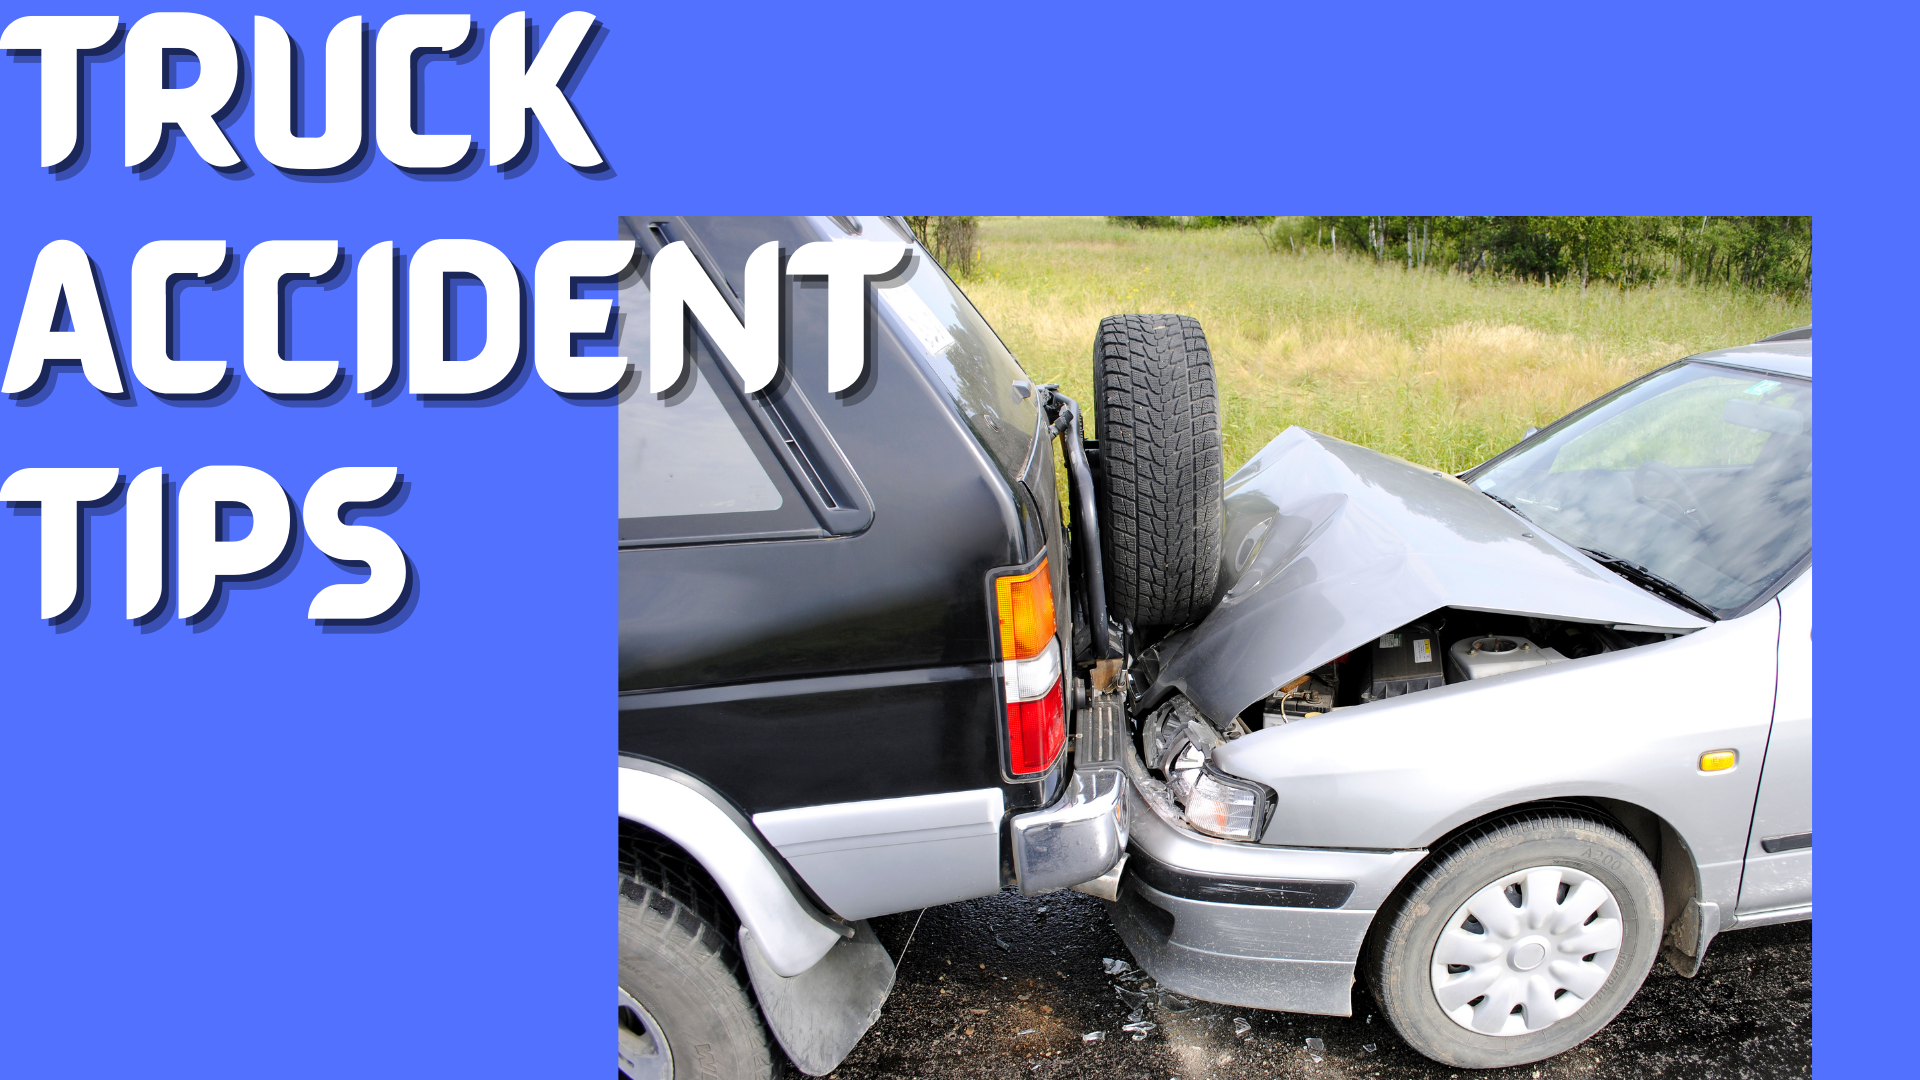 Truck Accident Tips